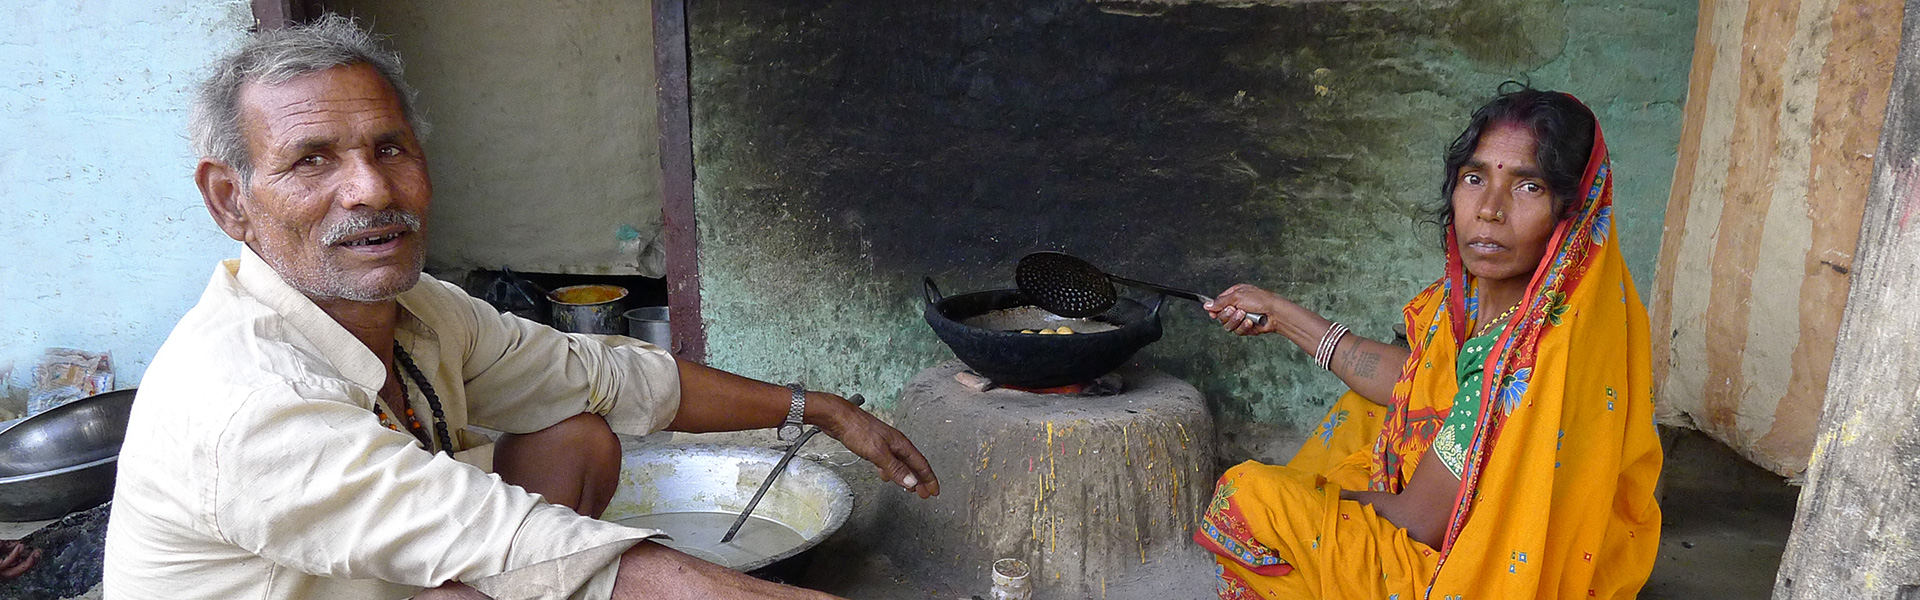 nepal-husbond-and-wife-in-kitchen